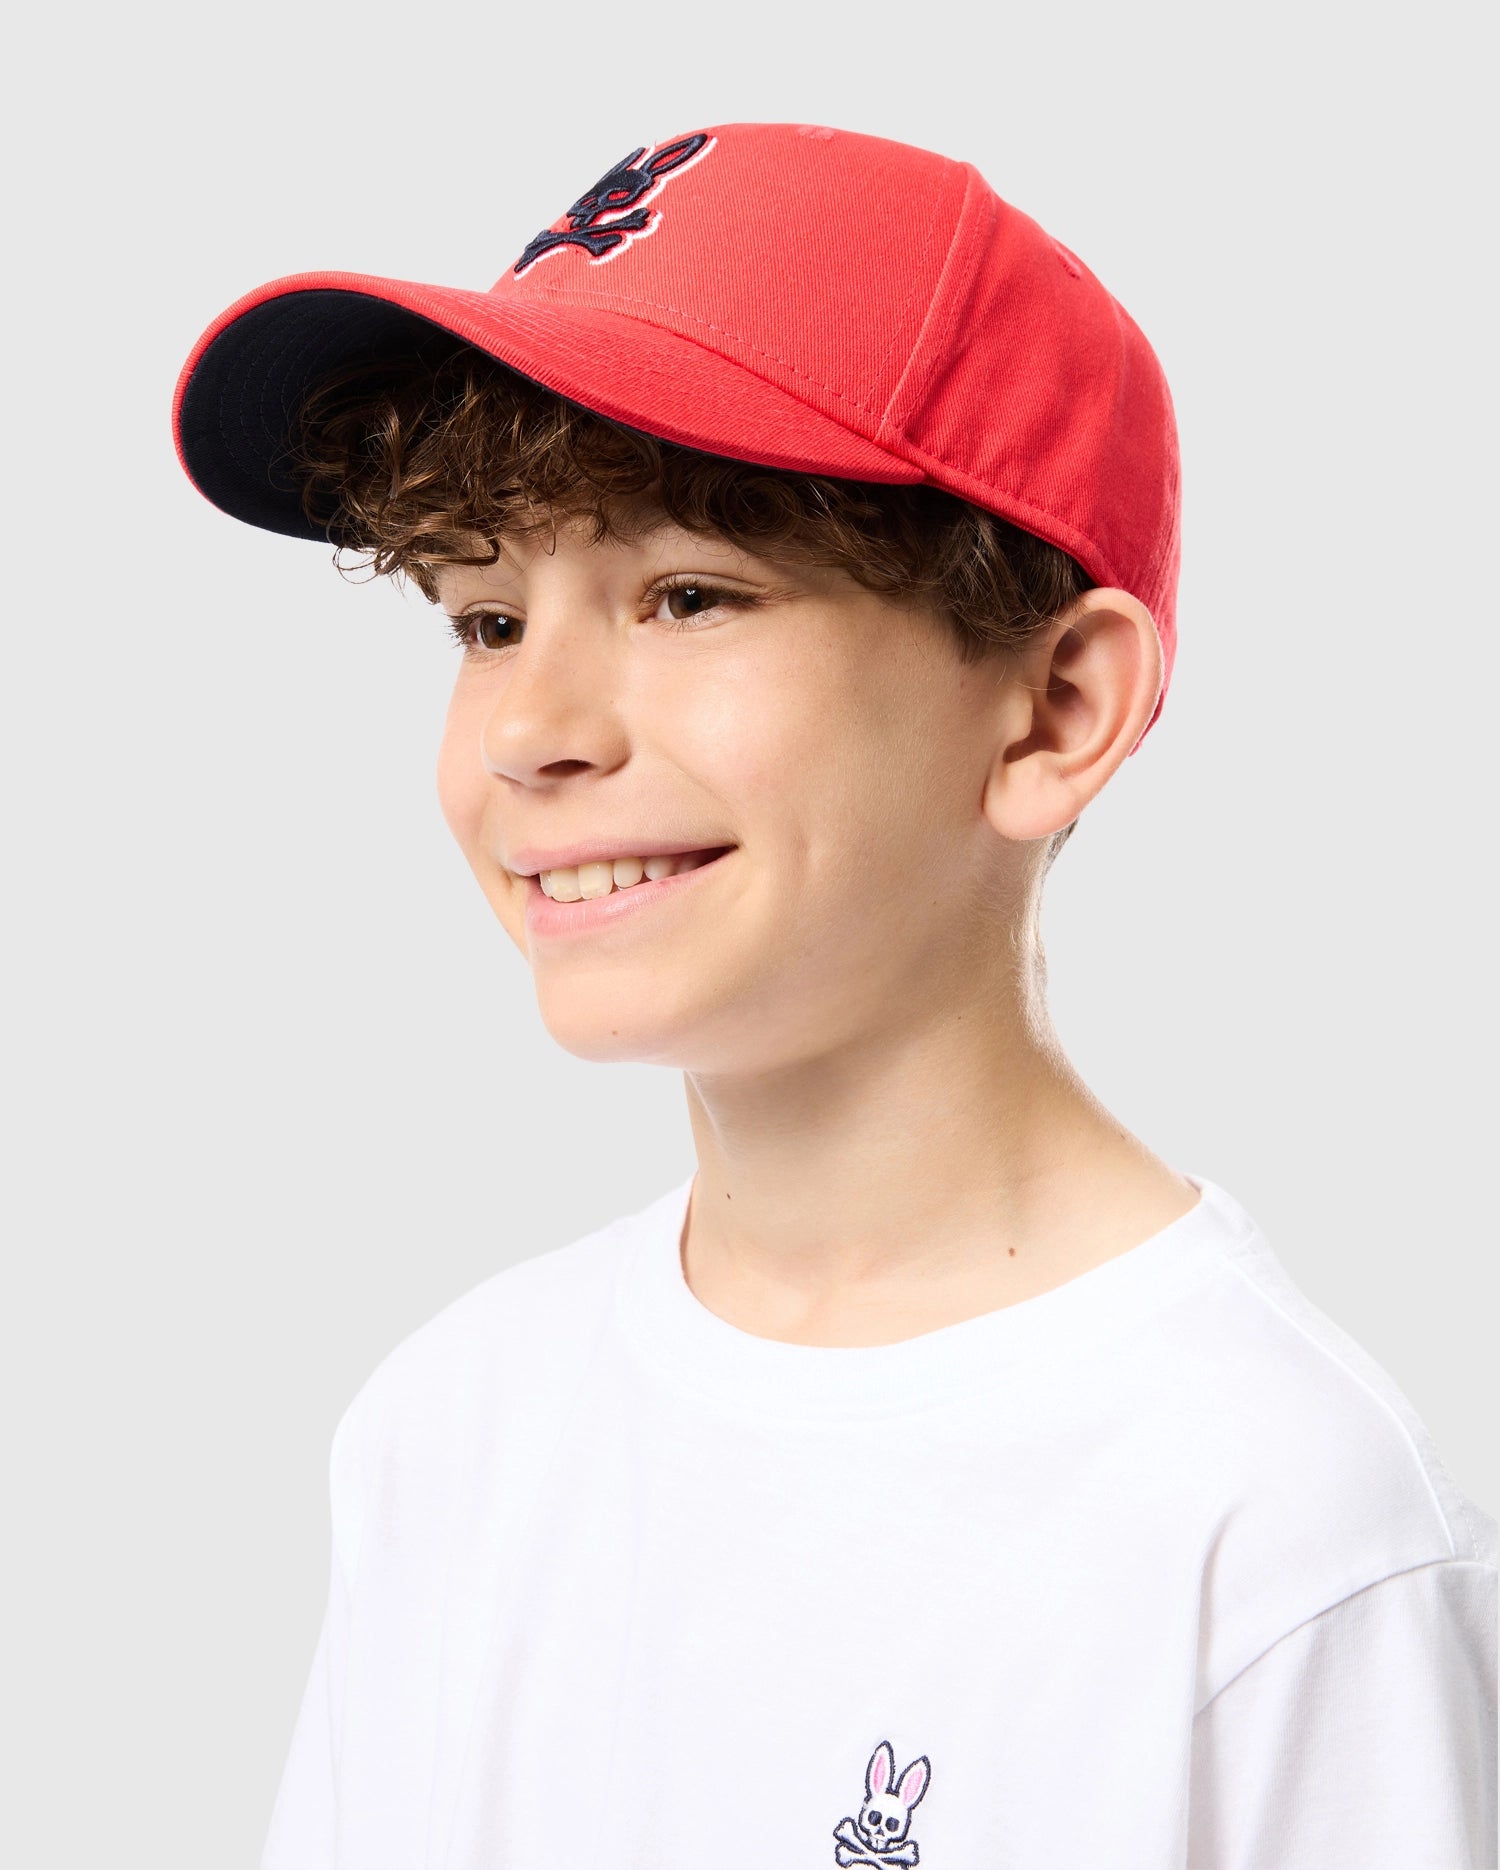 A smiling young person with curly hair wears a red KIDS KAYDEN BASEBALL CAP - B0A677C200 from Psycho Bunny, featuring a black brim and a navy blue logo on the front. They are also wearing a white T-shirt with a small bunny logo on the chest, set against a plain light gray background.